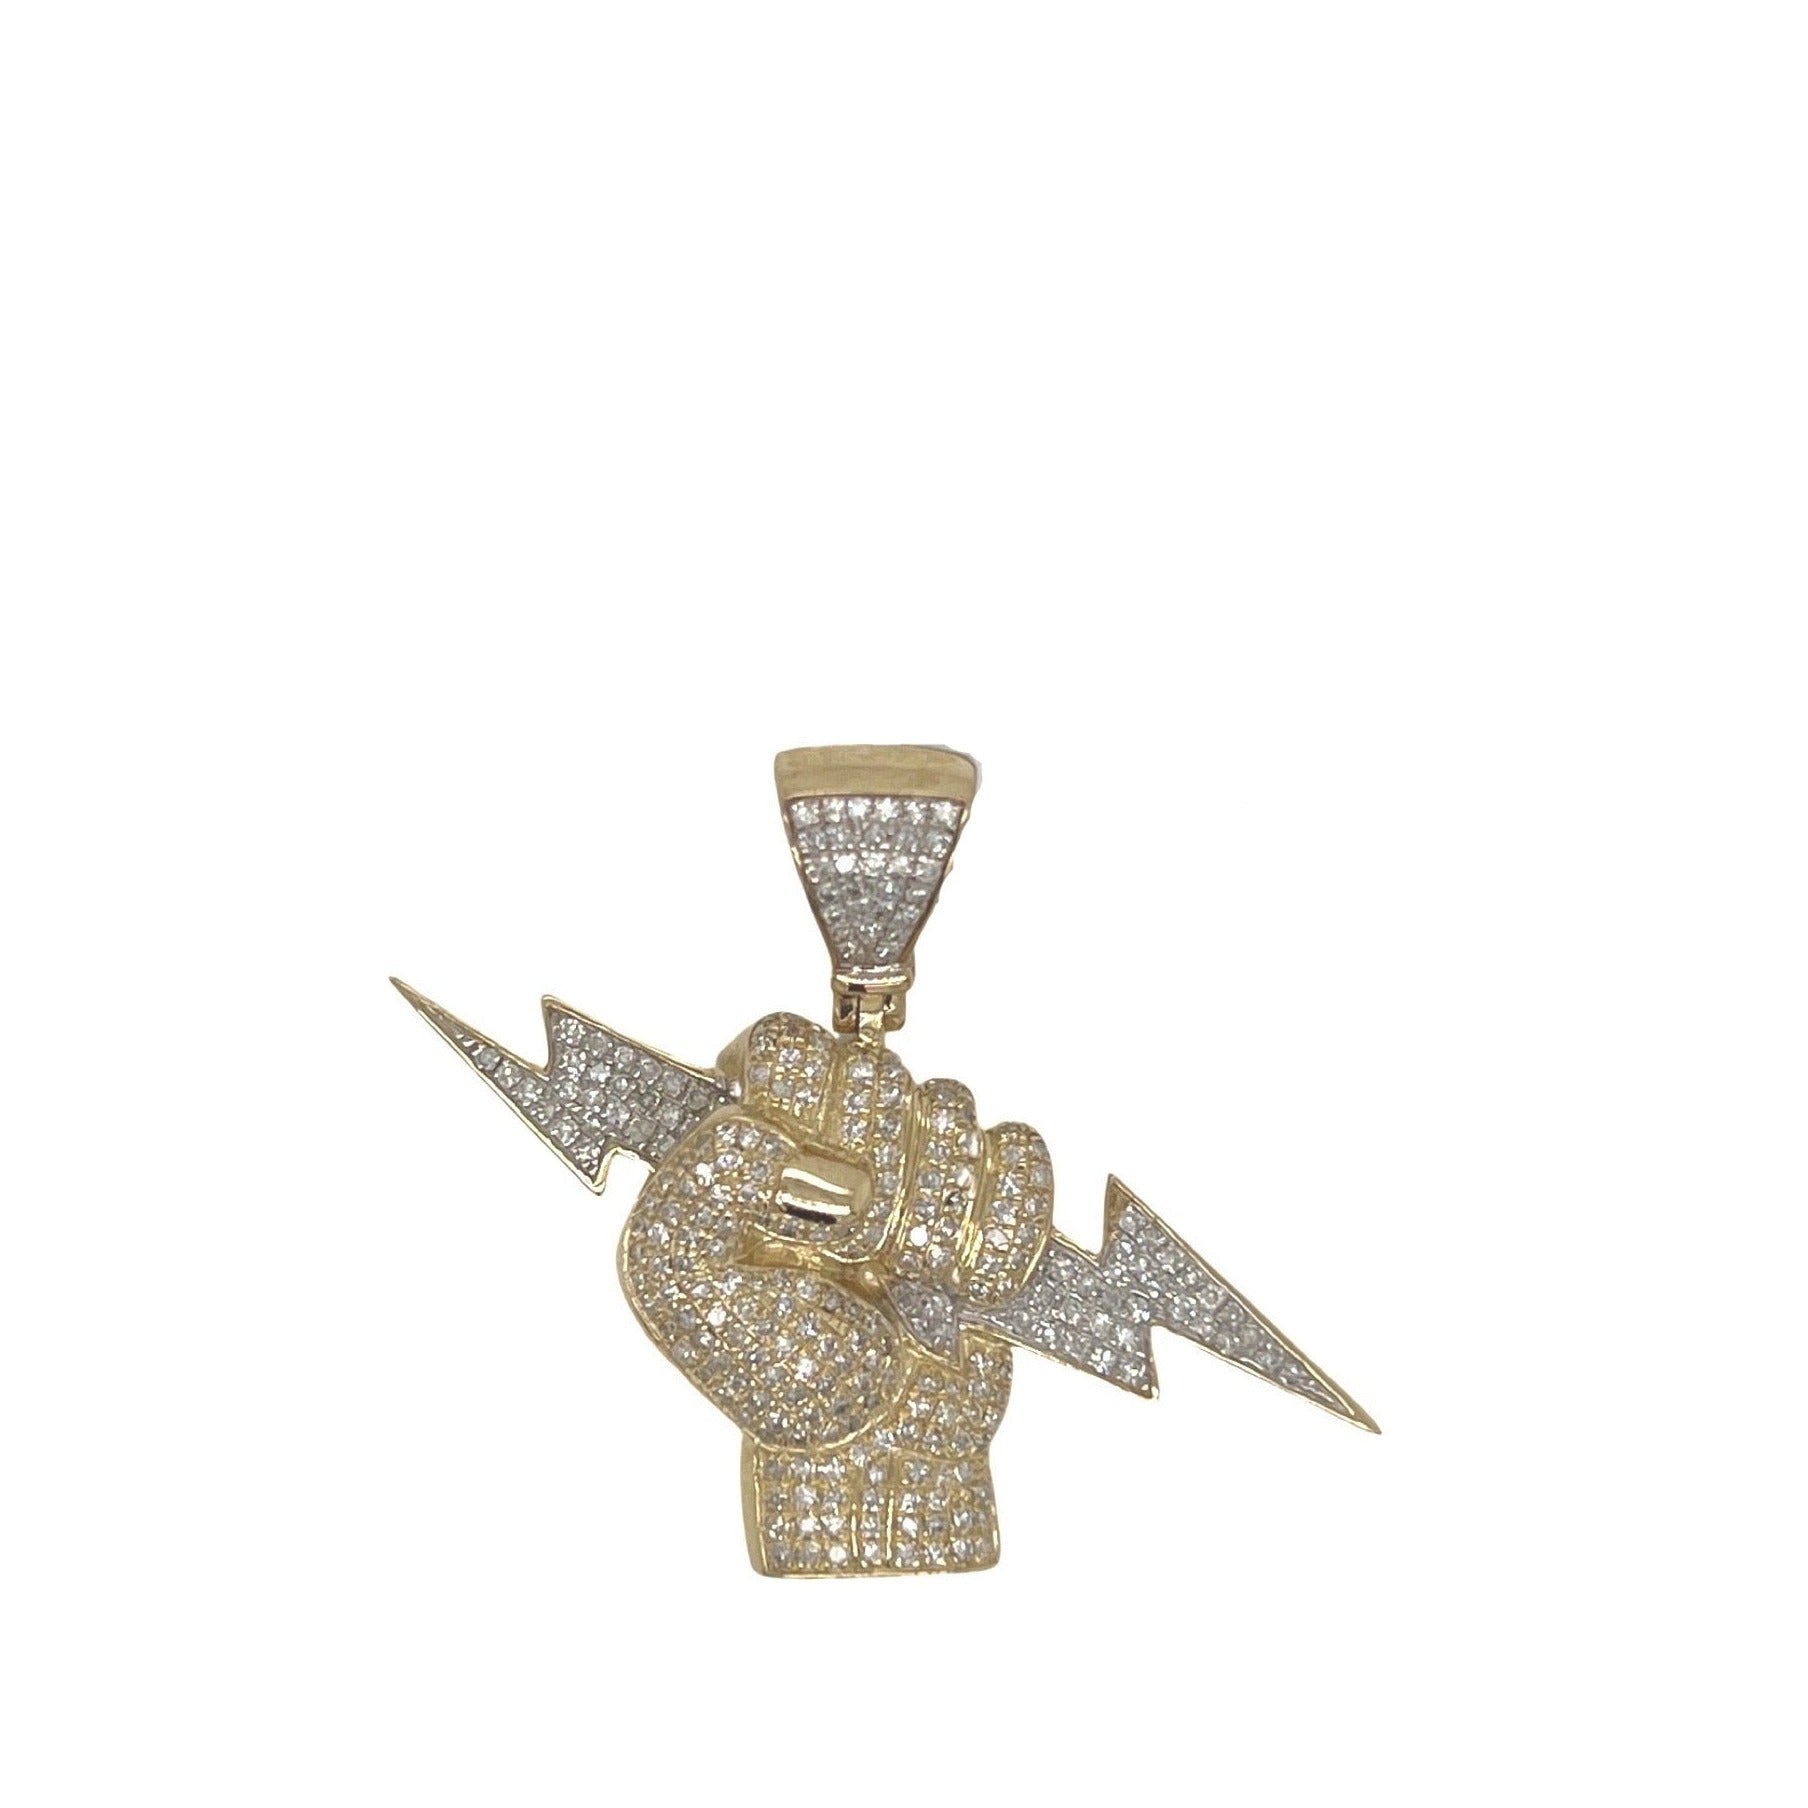 10k gold iced out Louis Vuitton pendant only available for a